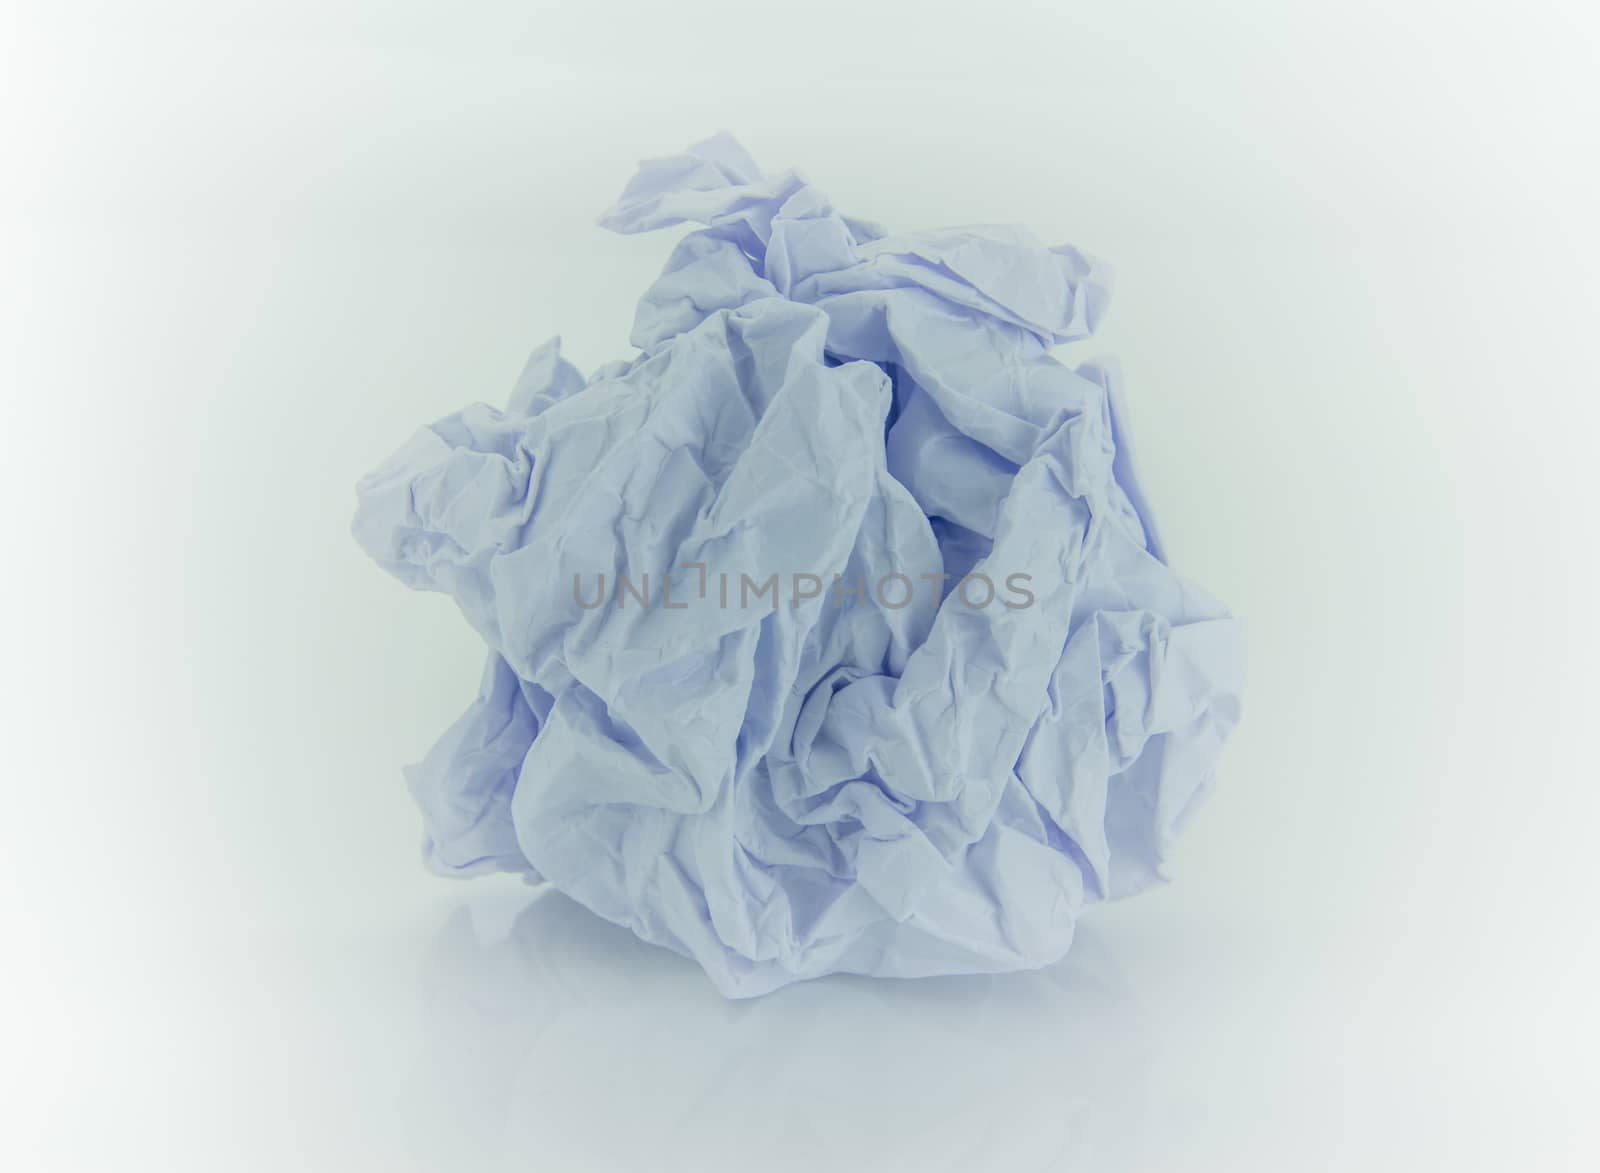 The Crumpled white paper ball